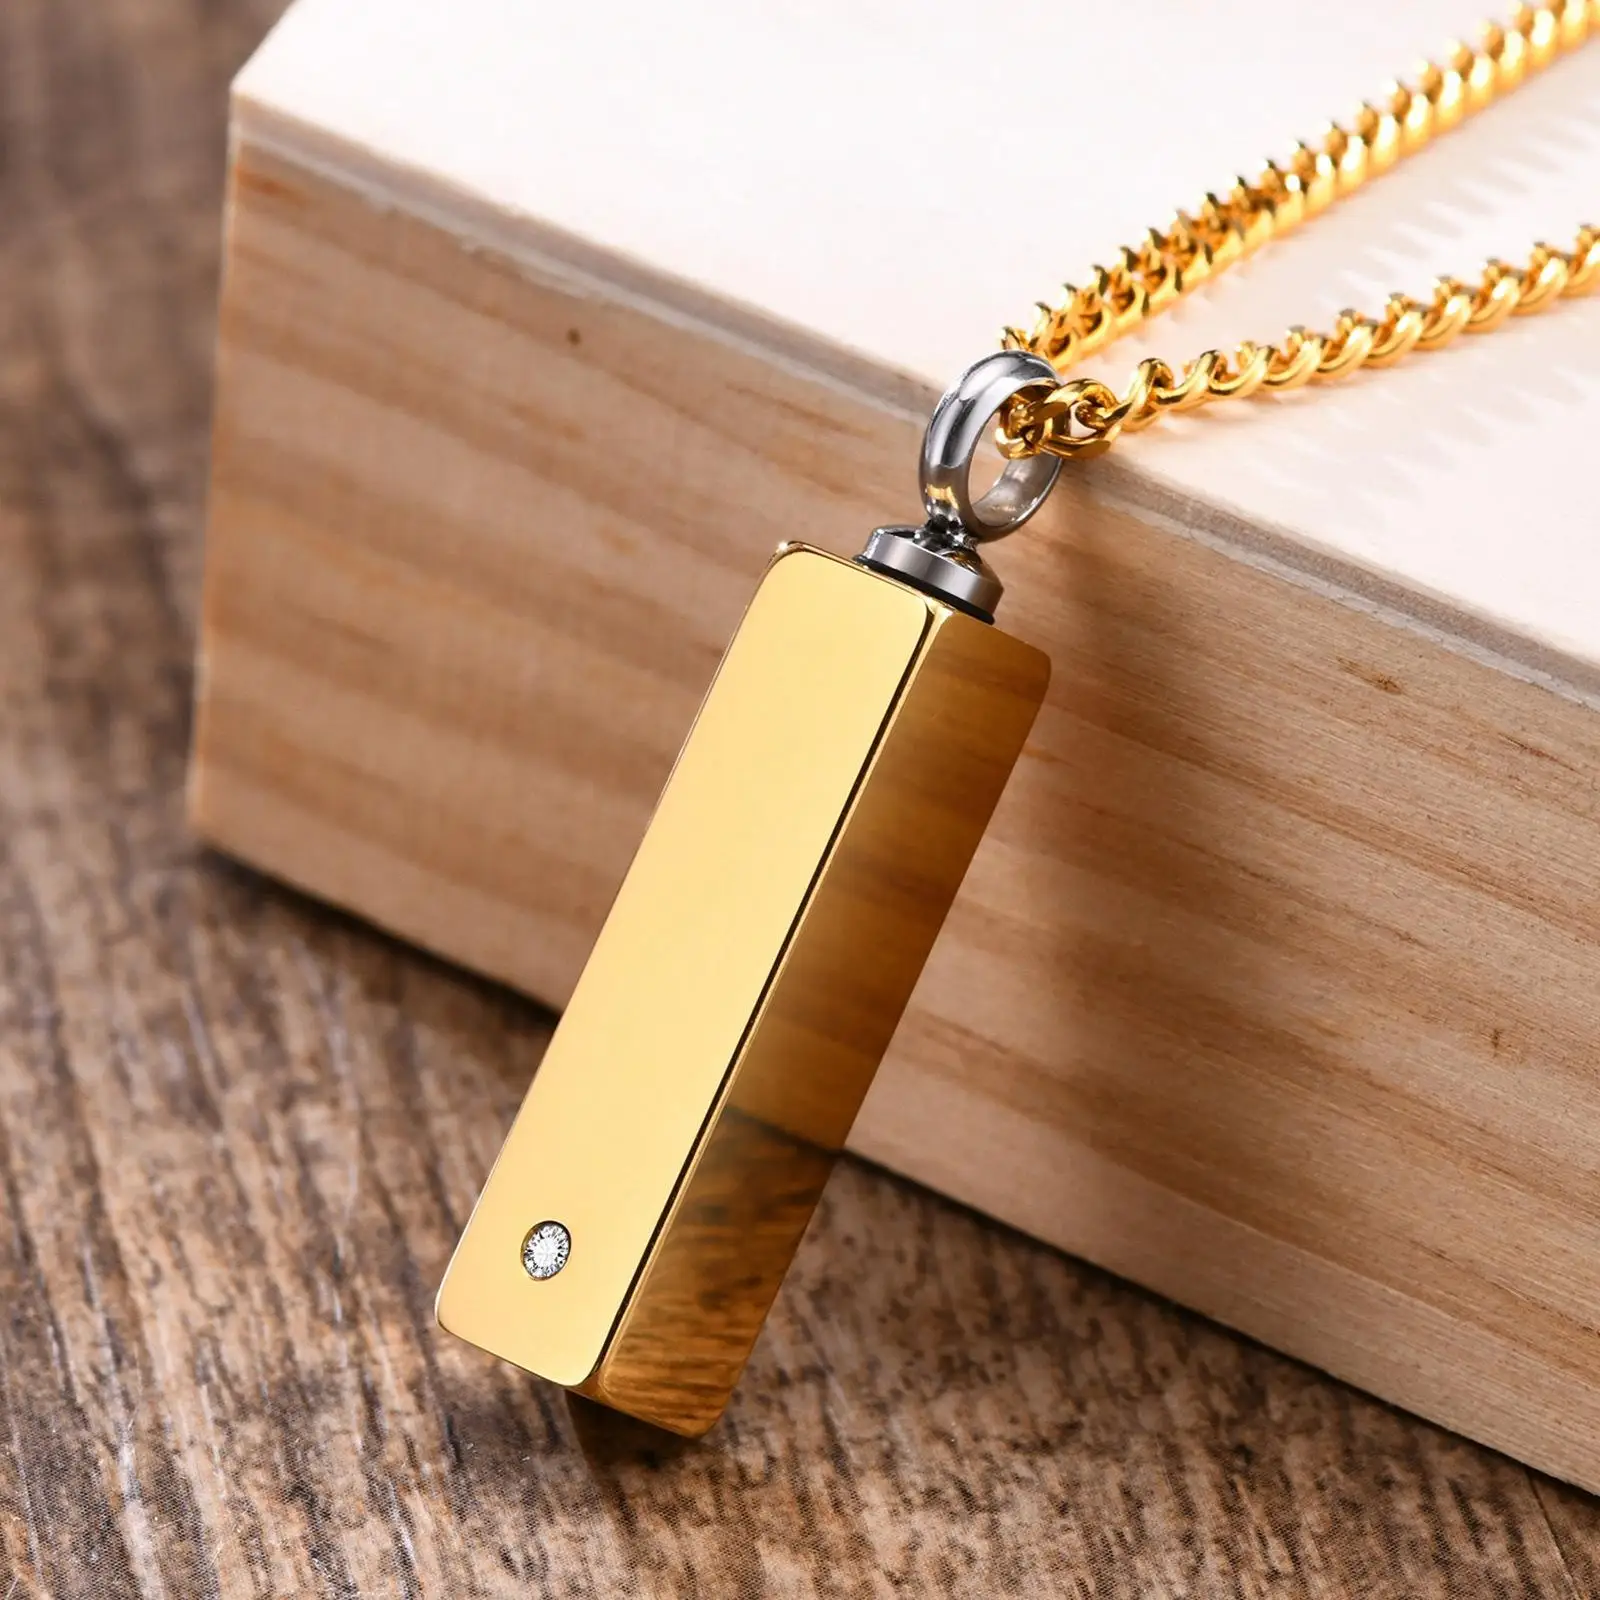 Cube Crystal Urn Necklaces Keepsake Jewelry Decorative Hypoallergic Manmade Stainless Steel Charm Locket Pendant for Ashes Gift